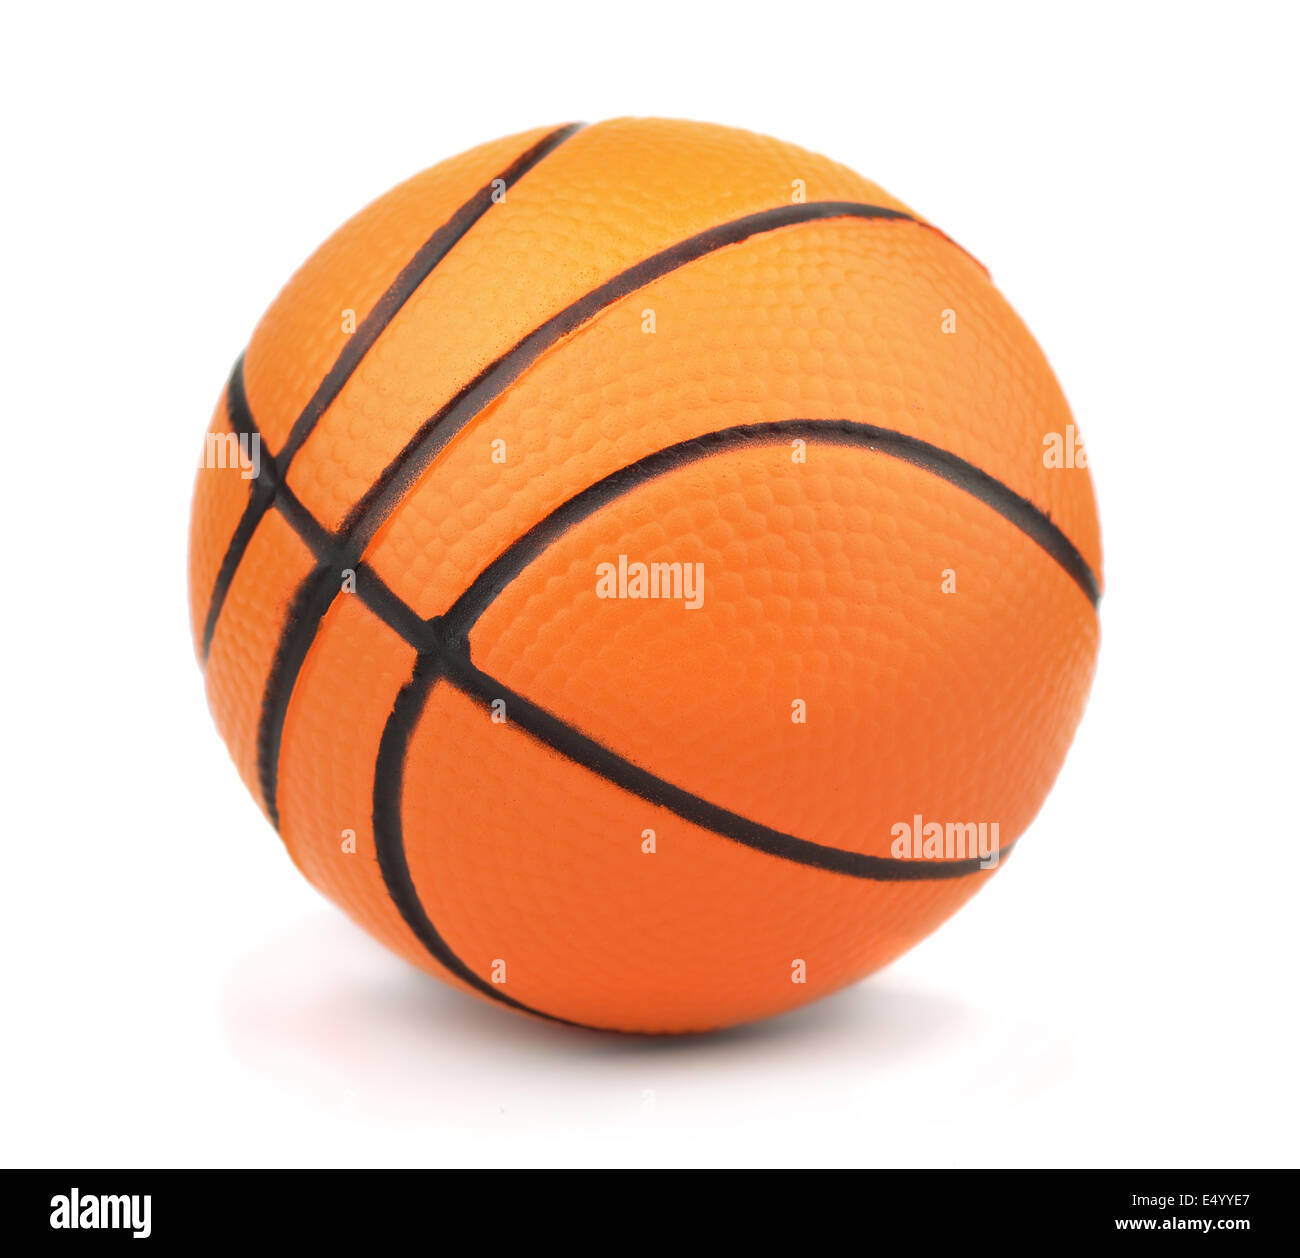 Small toy basketball ball isolated on white Stock Photo